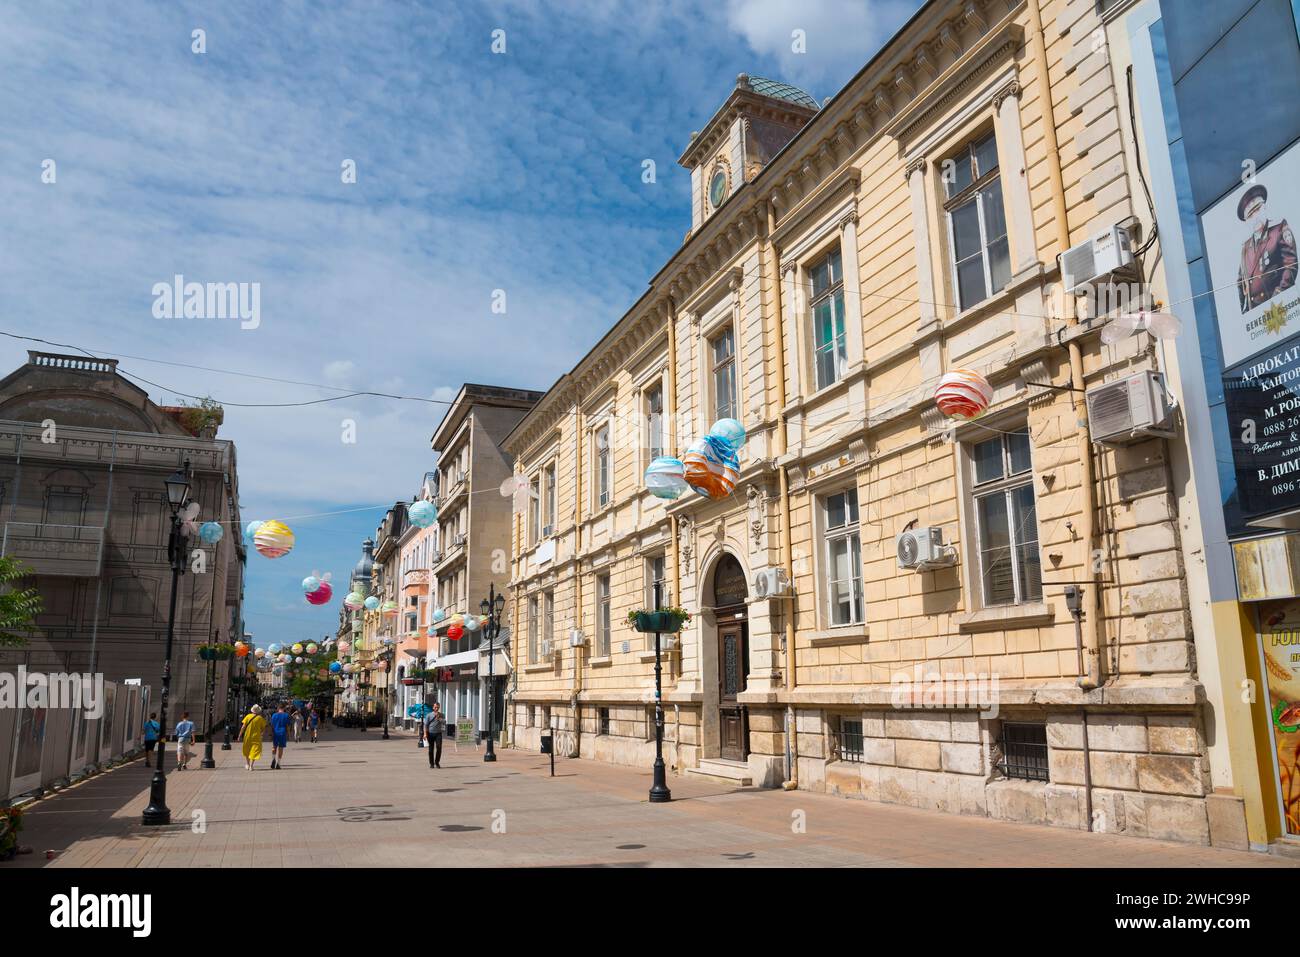 A lively city street with historic architecture and balloon decorations on a sunny day, pedestrian zone Alexandrovska, Russe, Ruse, Pyce, Bulgaria Stock Photo